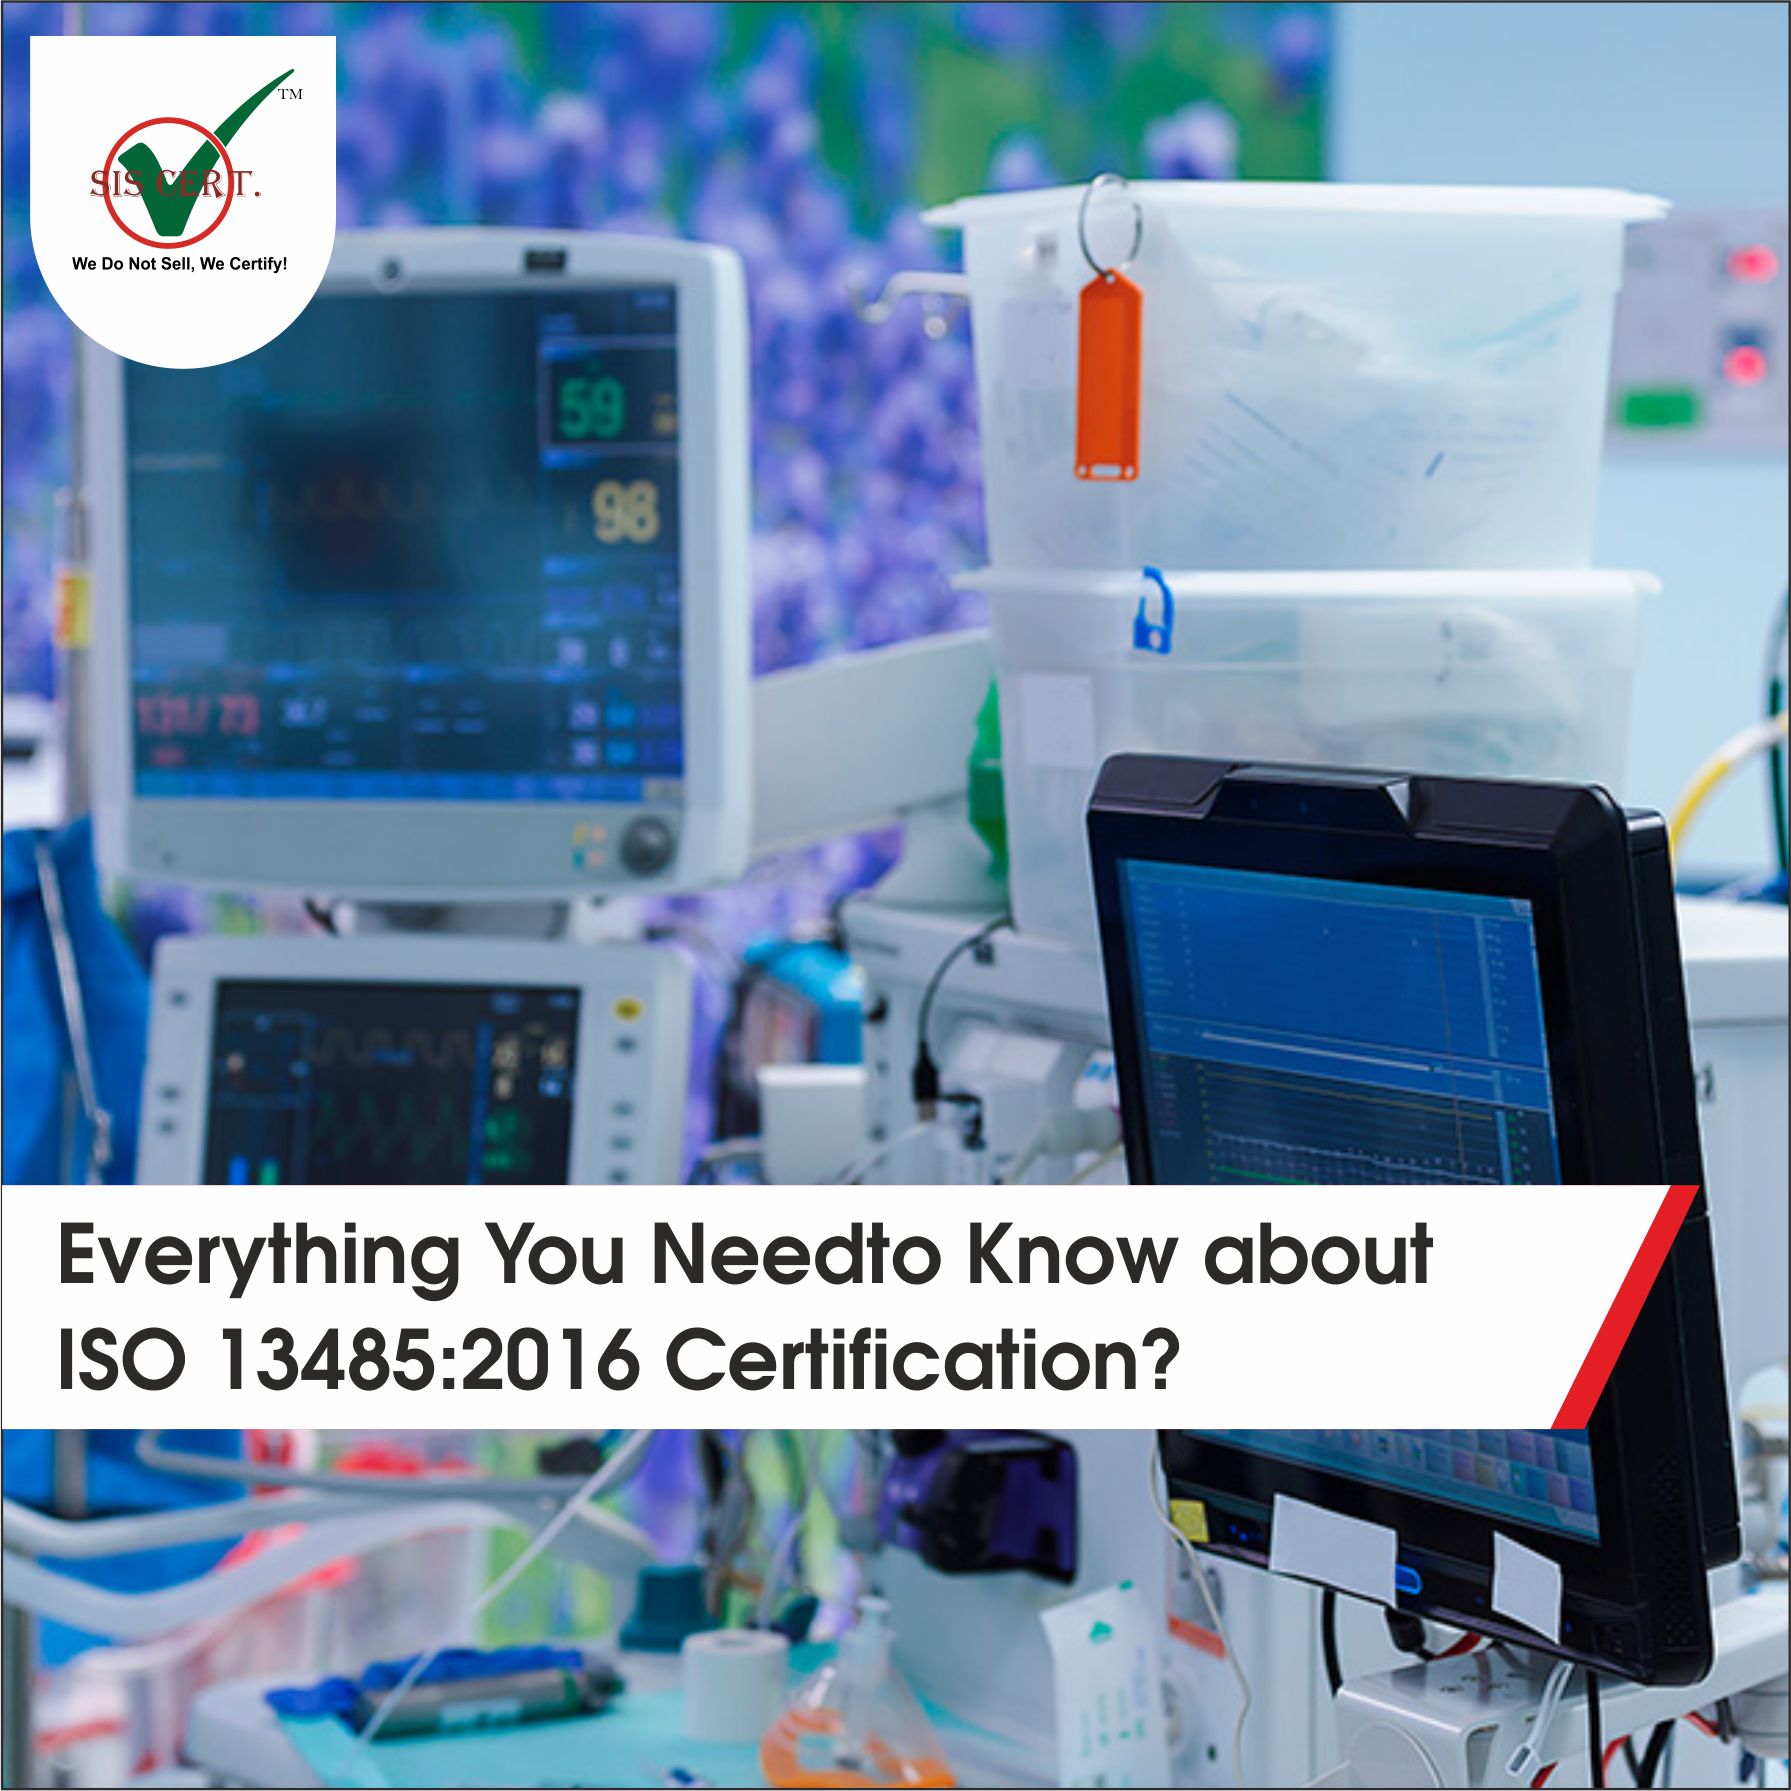 Everything You Need to Know about ISO 13485:2016 Certification?